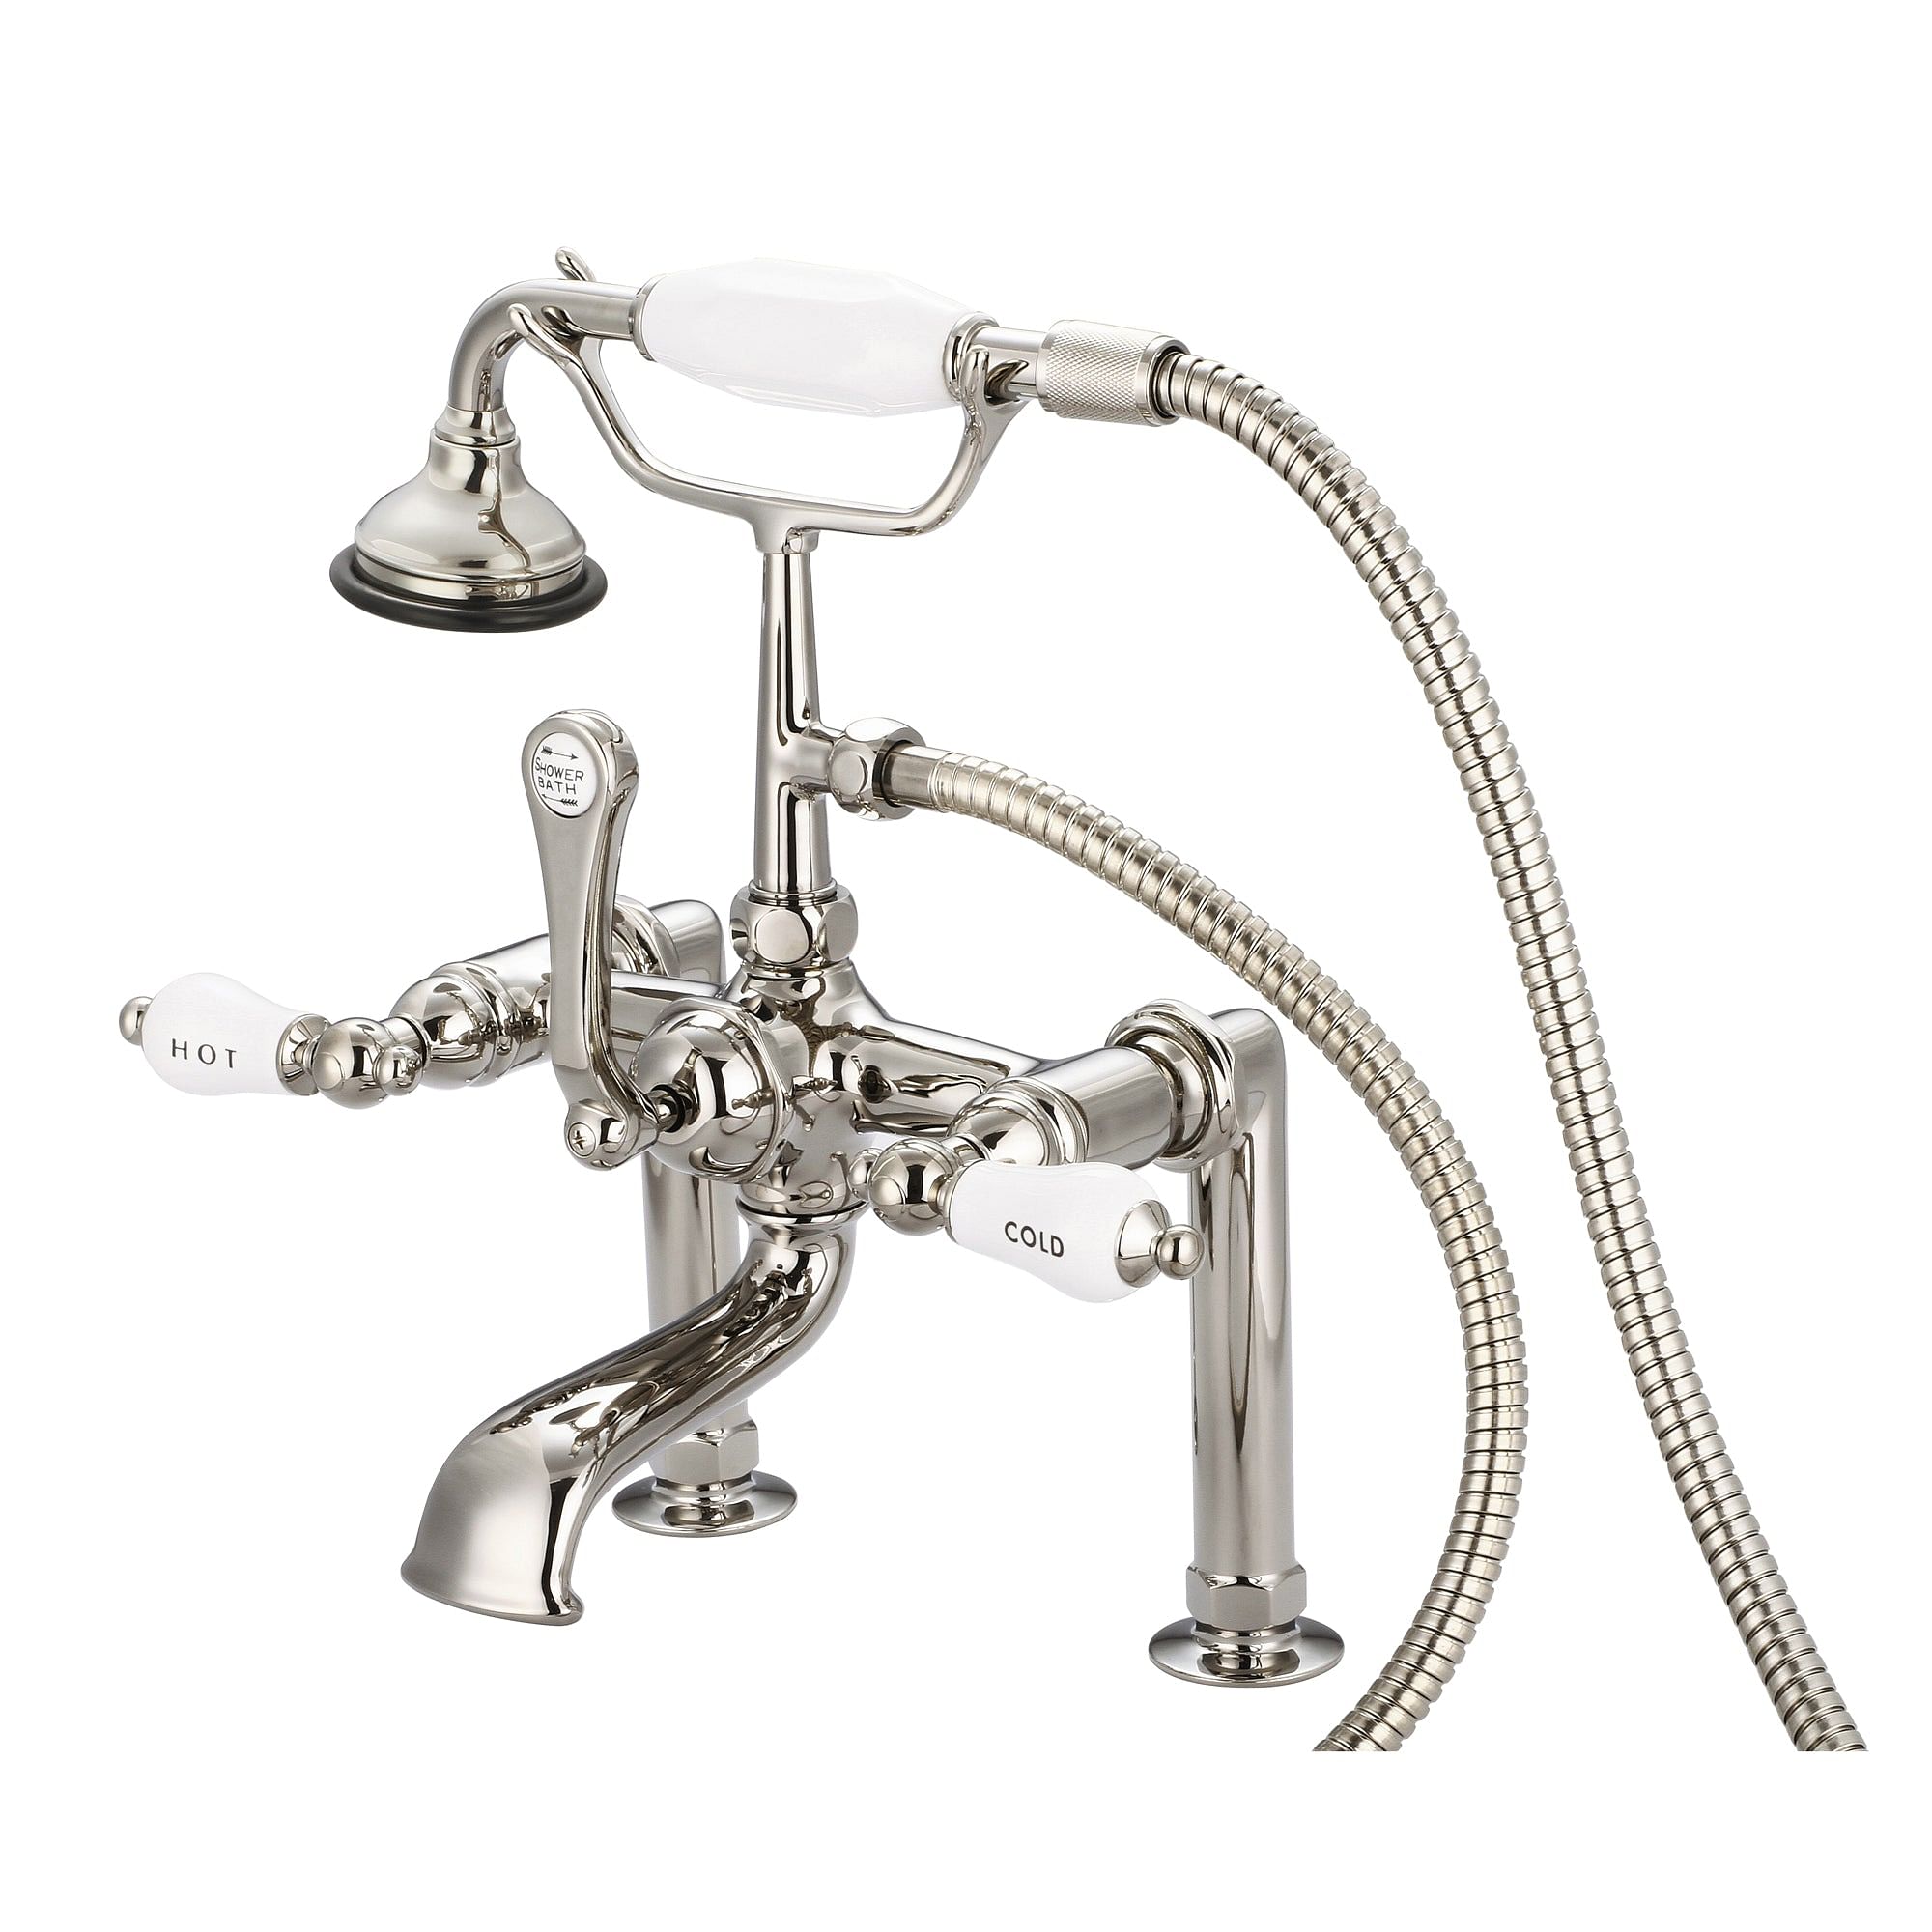 Vintage Classic 7 Inch Spread Deck Mount Tub Faucet With 6 Inch Risers & Handheld Shower in Polished Nickel (PVD) Finish With Porcelain Lever Handles, Hot And Cold Labels Included